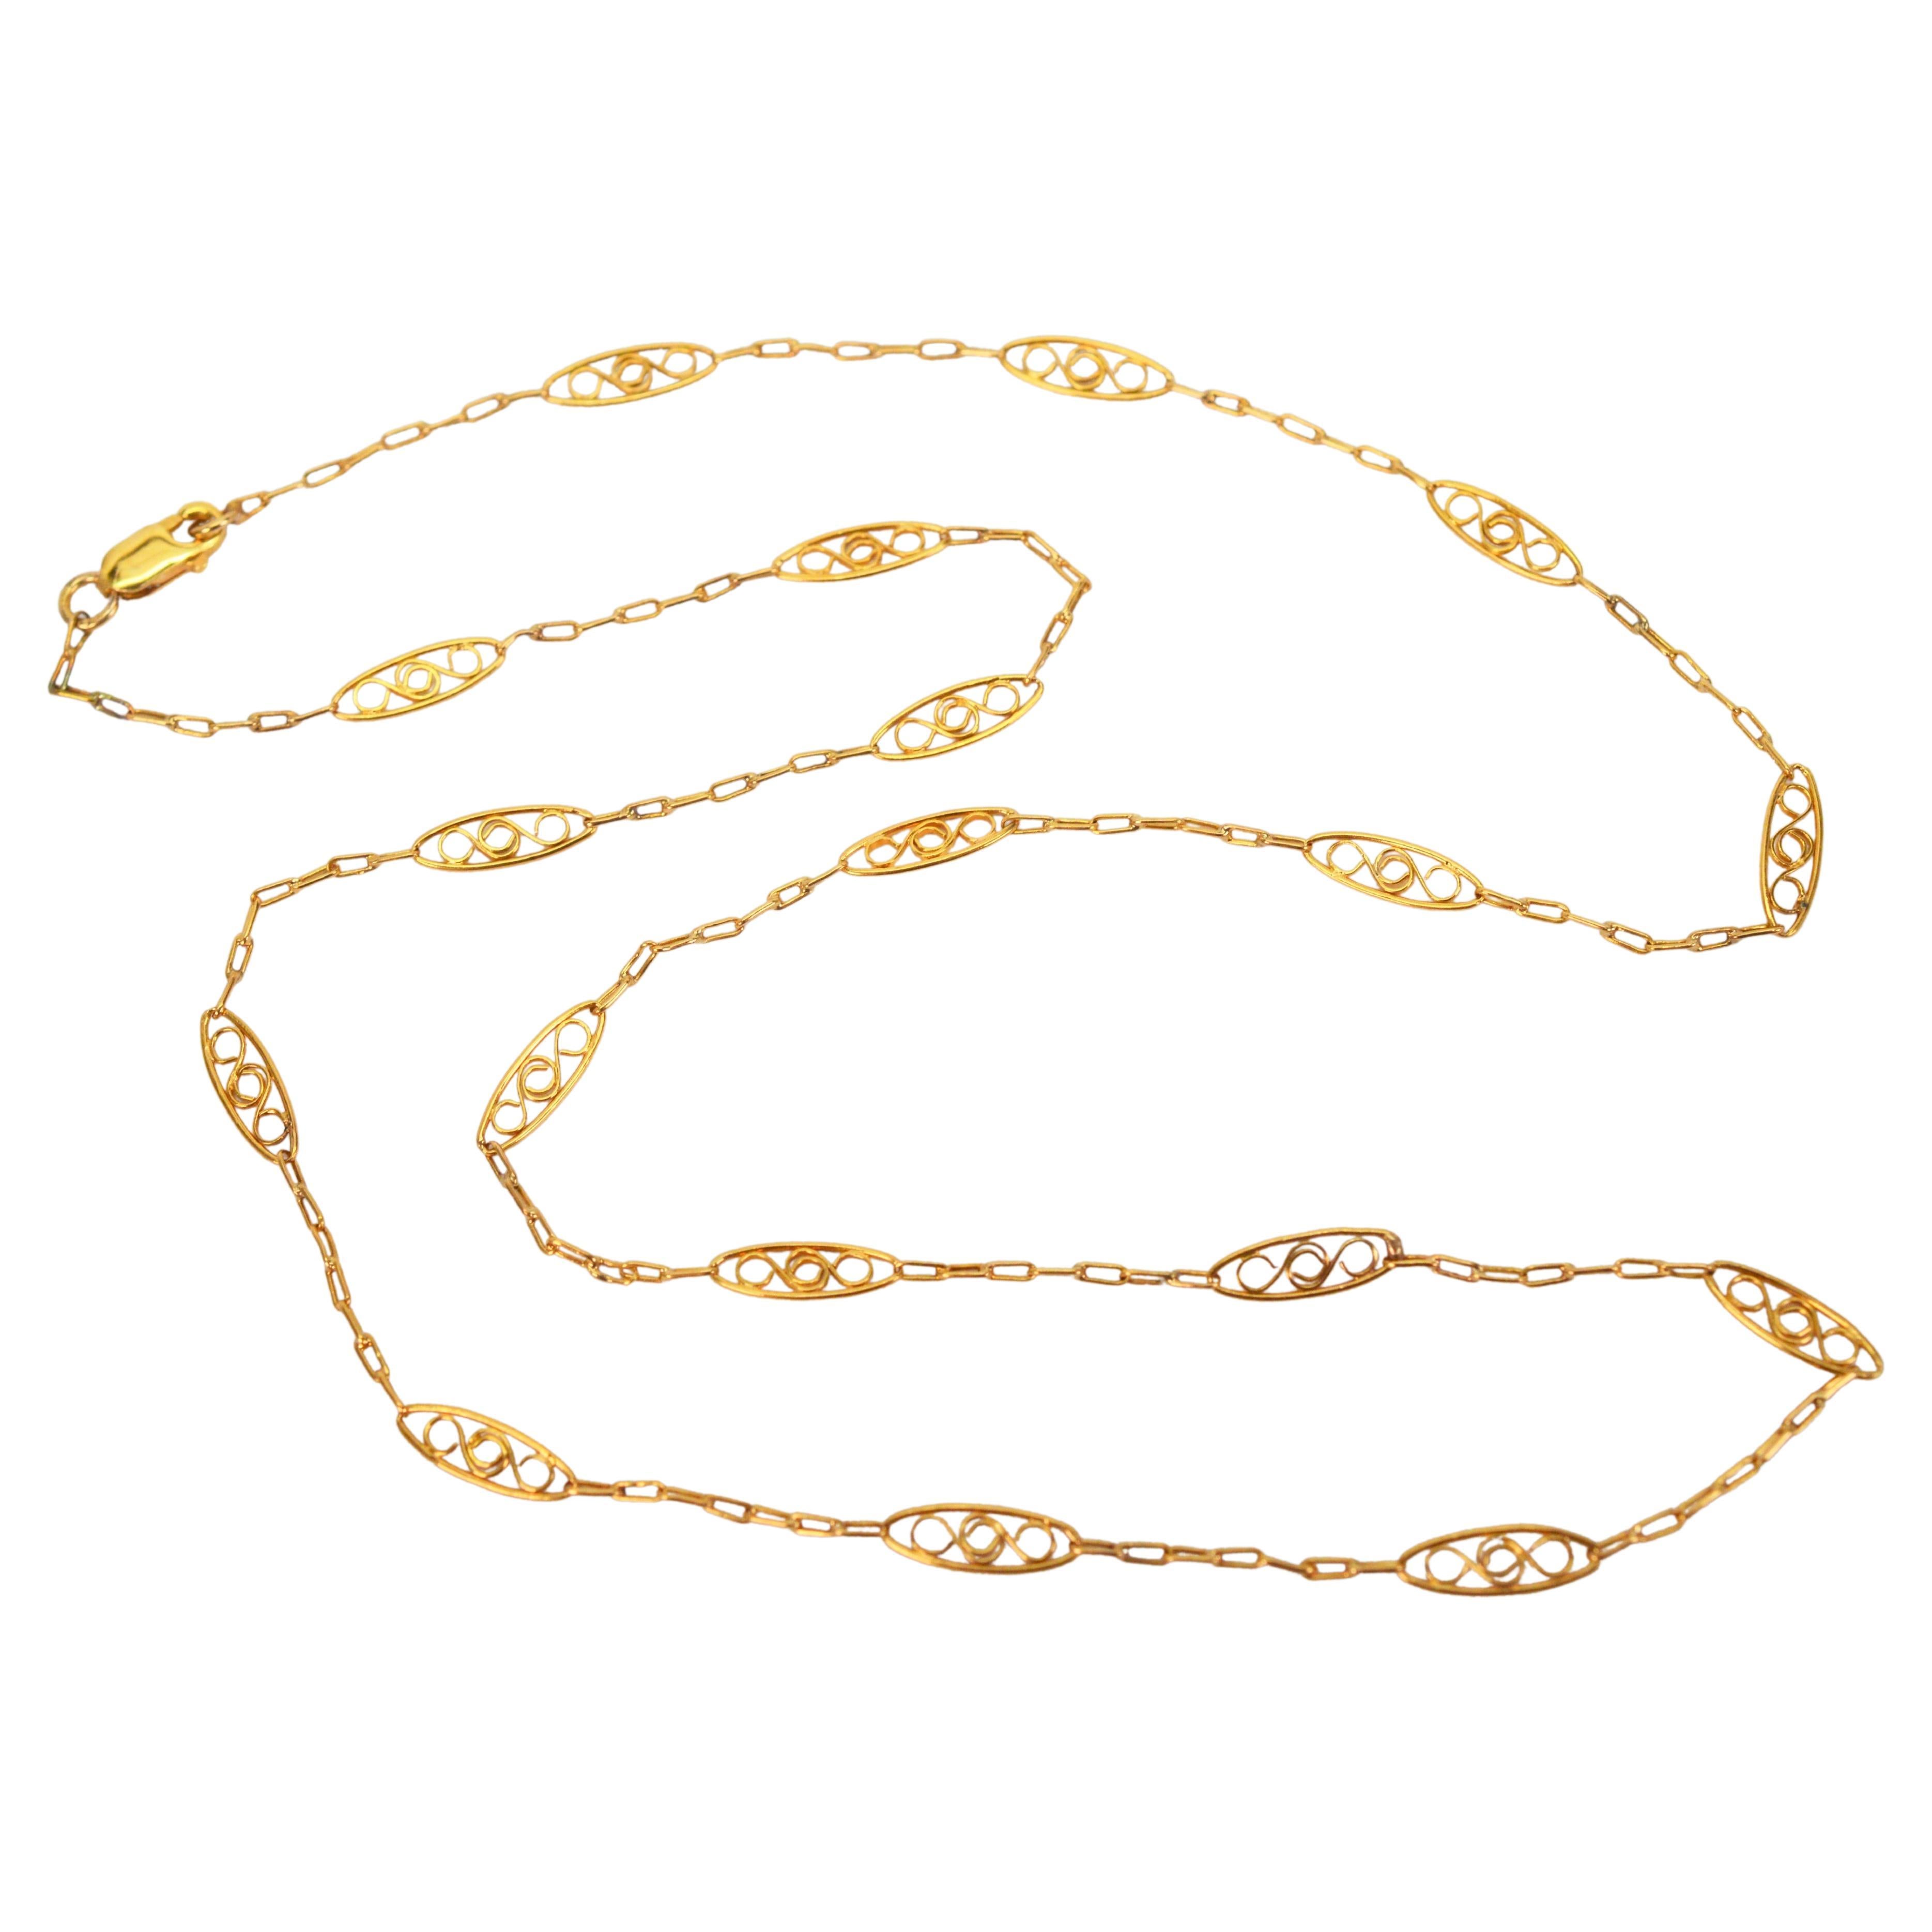 Lovely, Italian made filigree station chain in eighteen karat 18 karat yellow gold.  in a versatile 20 inch length and finished with a lobster clasp.
Gift boxed.